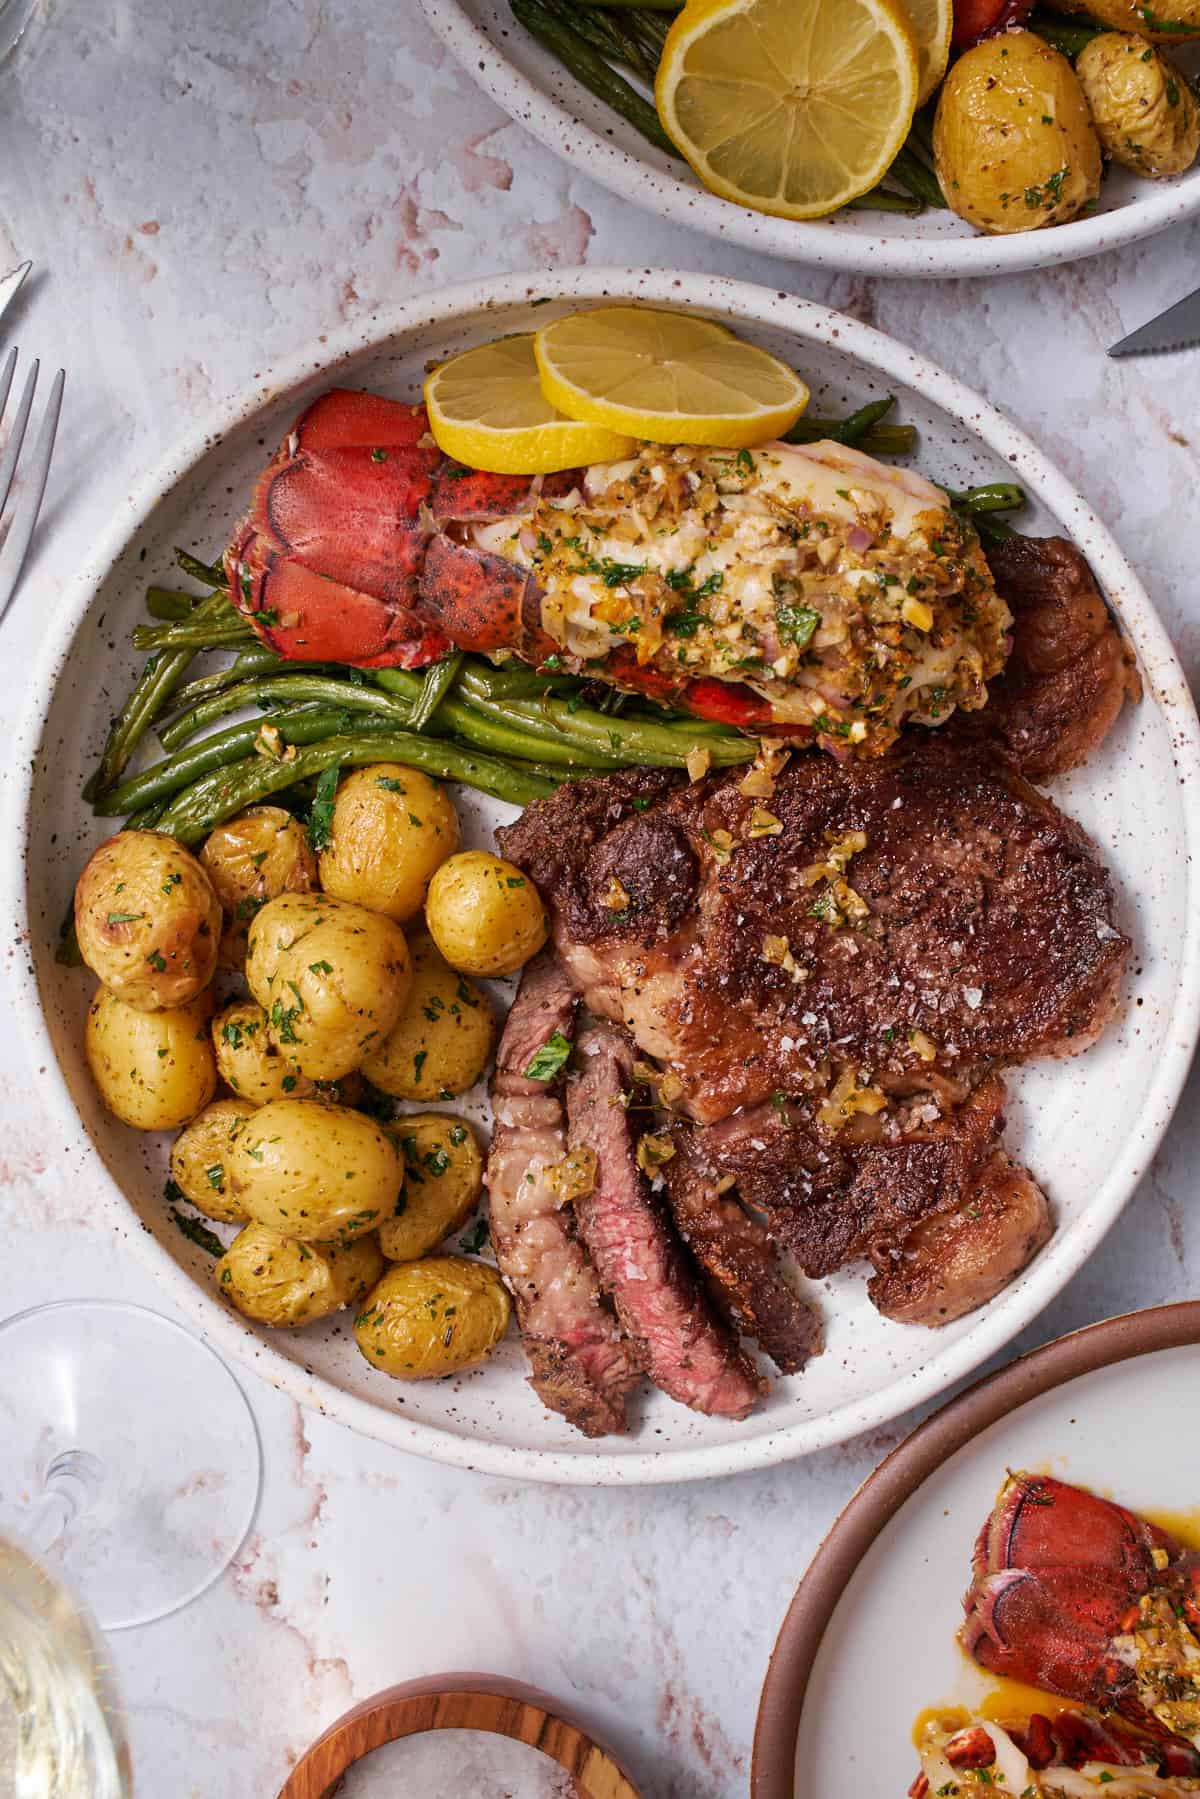 steak and lobster recipe with steak, potatoes, green beans, and lemon on a plate.